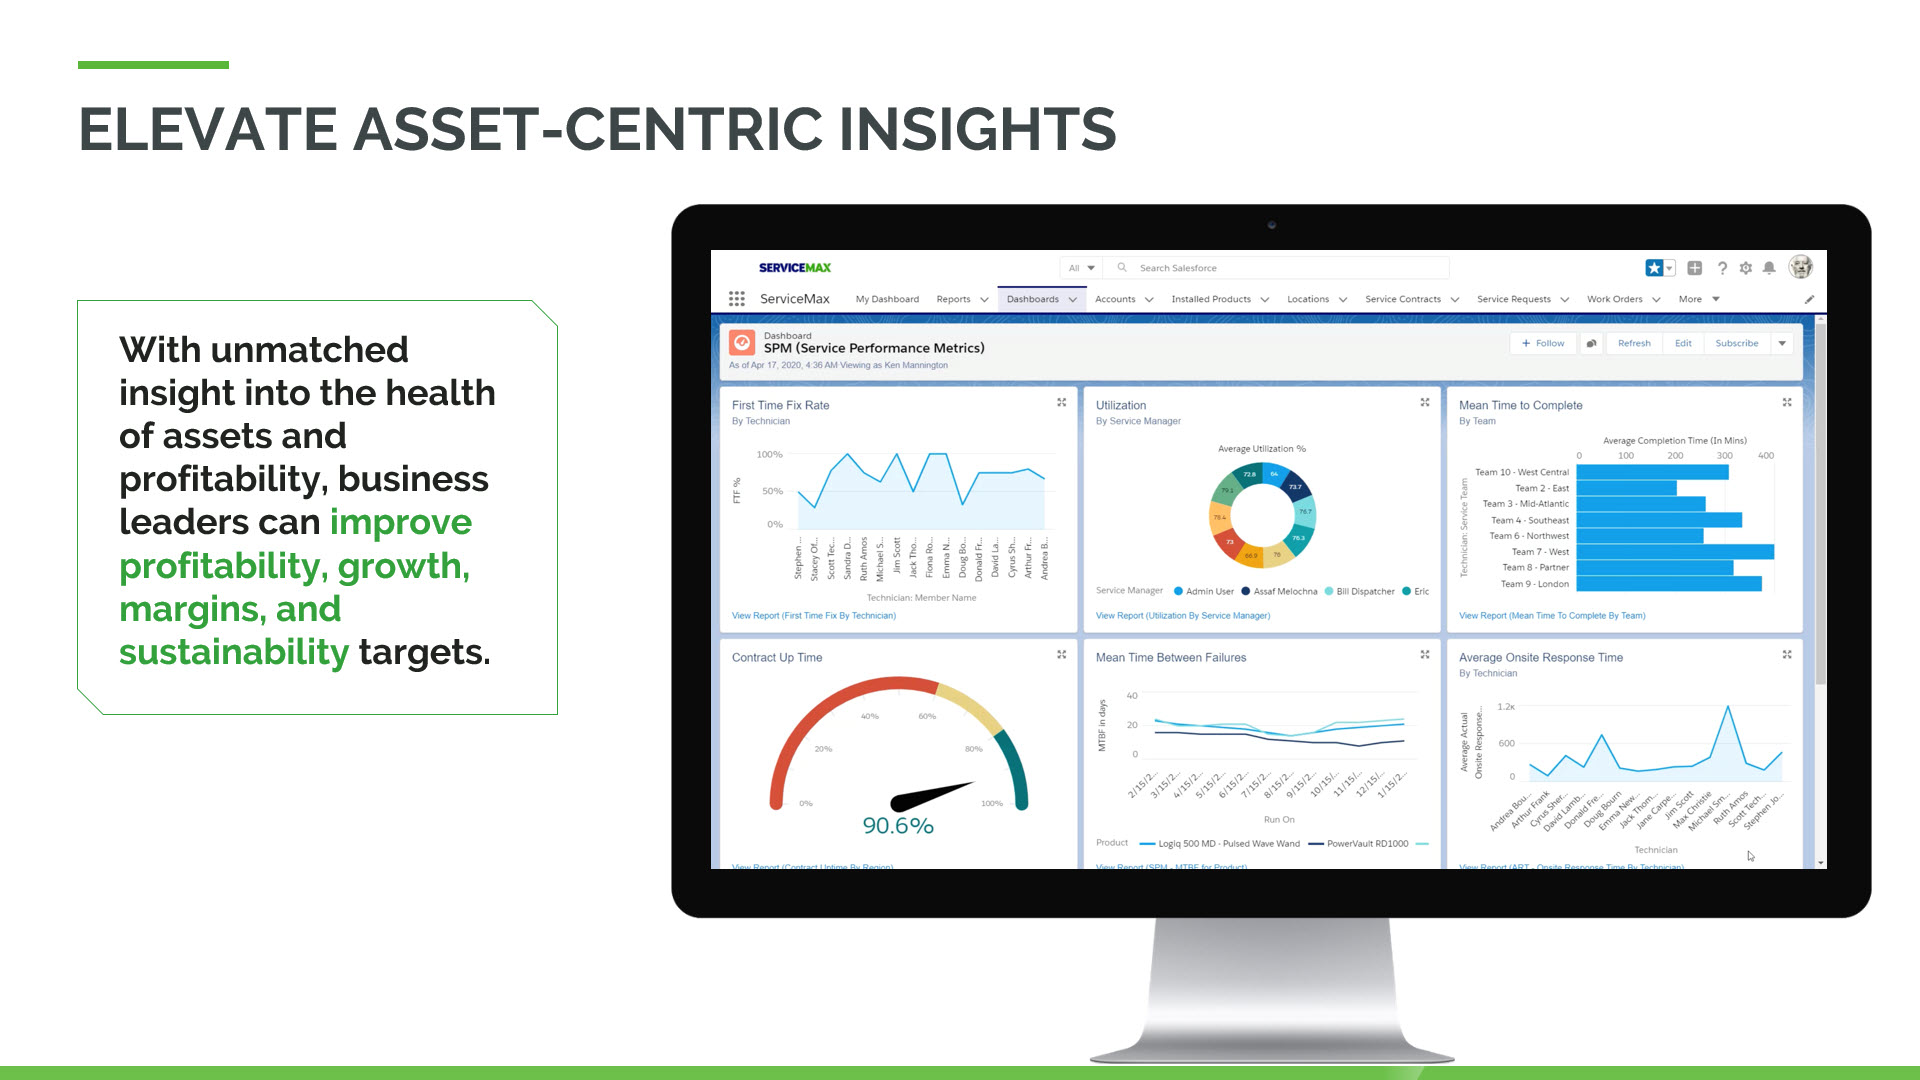 Drive operational excellence with the right performance metrics and actionable insights on ServiceMax reporting dashboards.